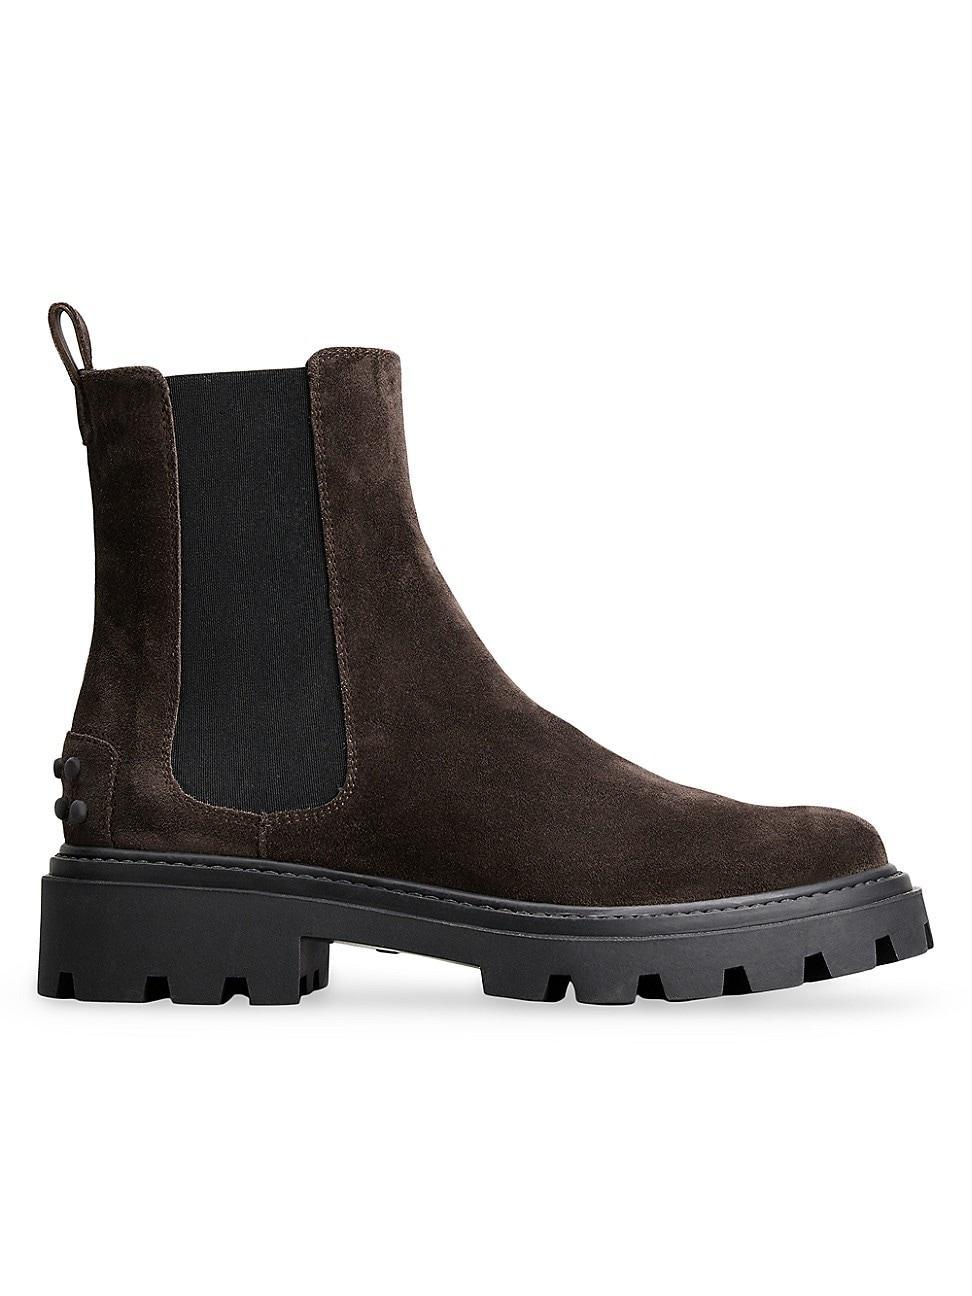 Tods Gomma Chelsea Boot Product Image